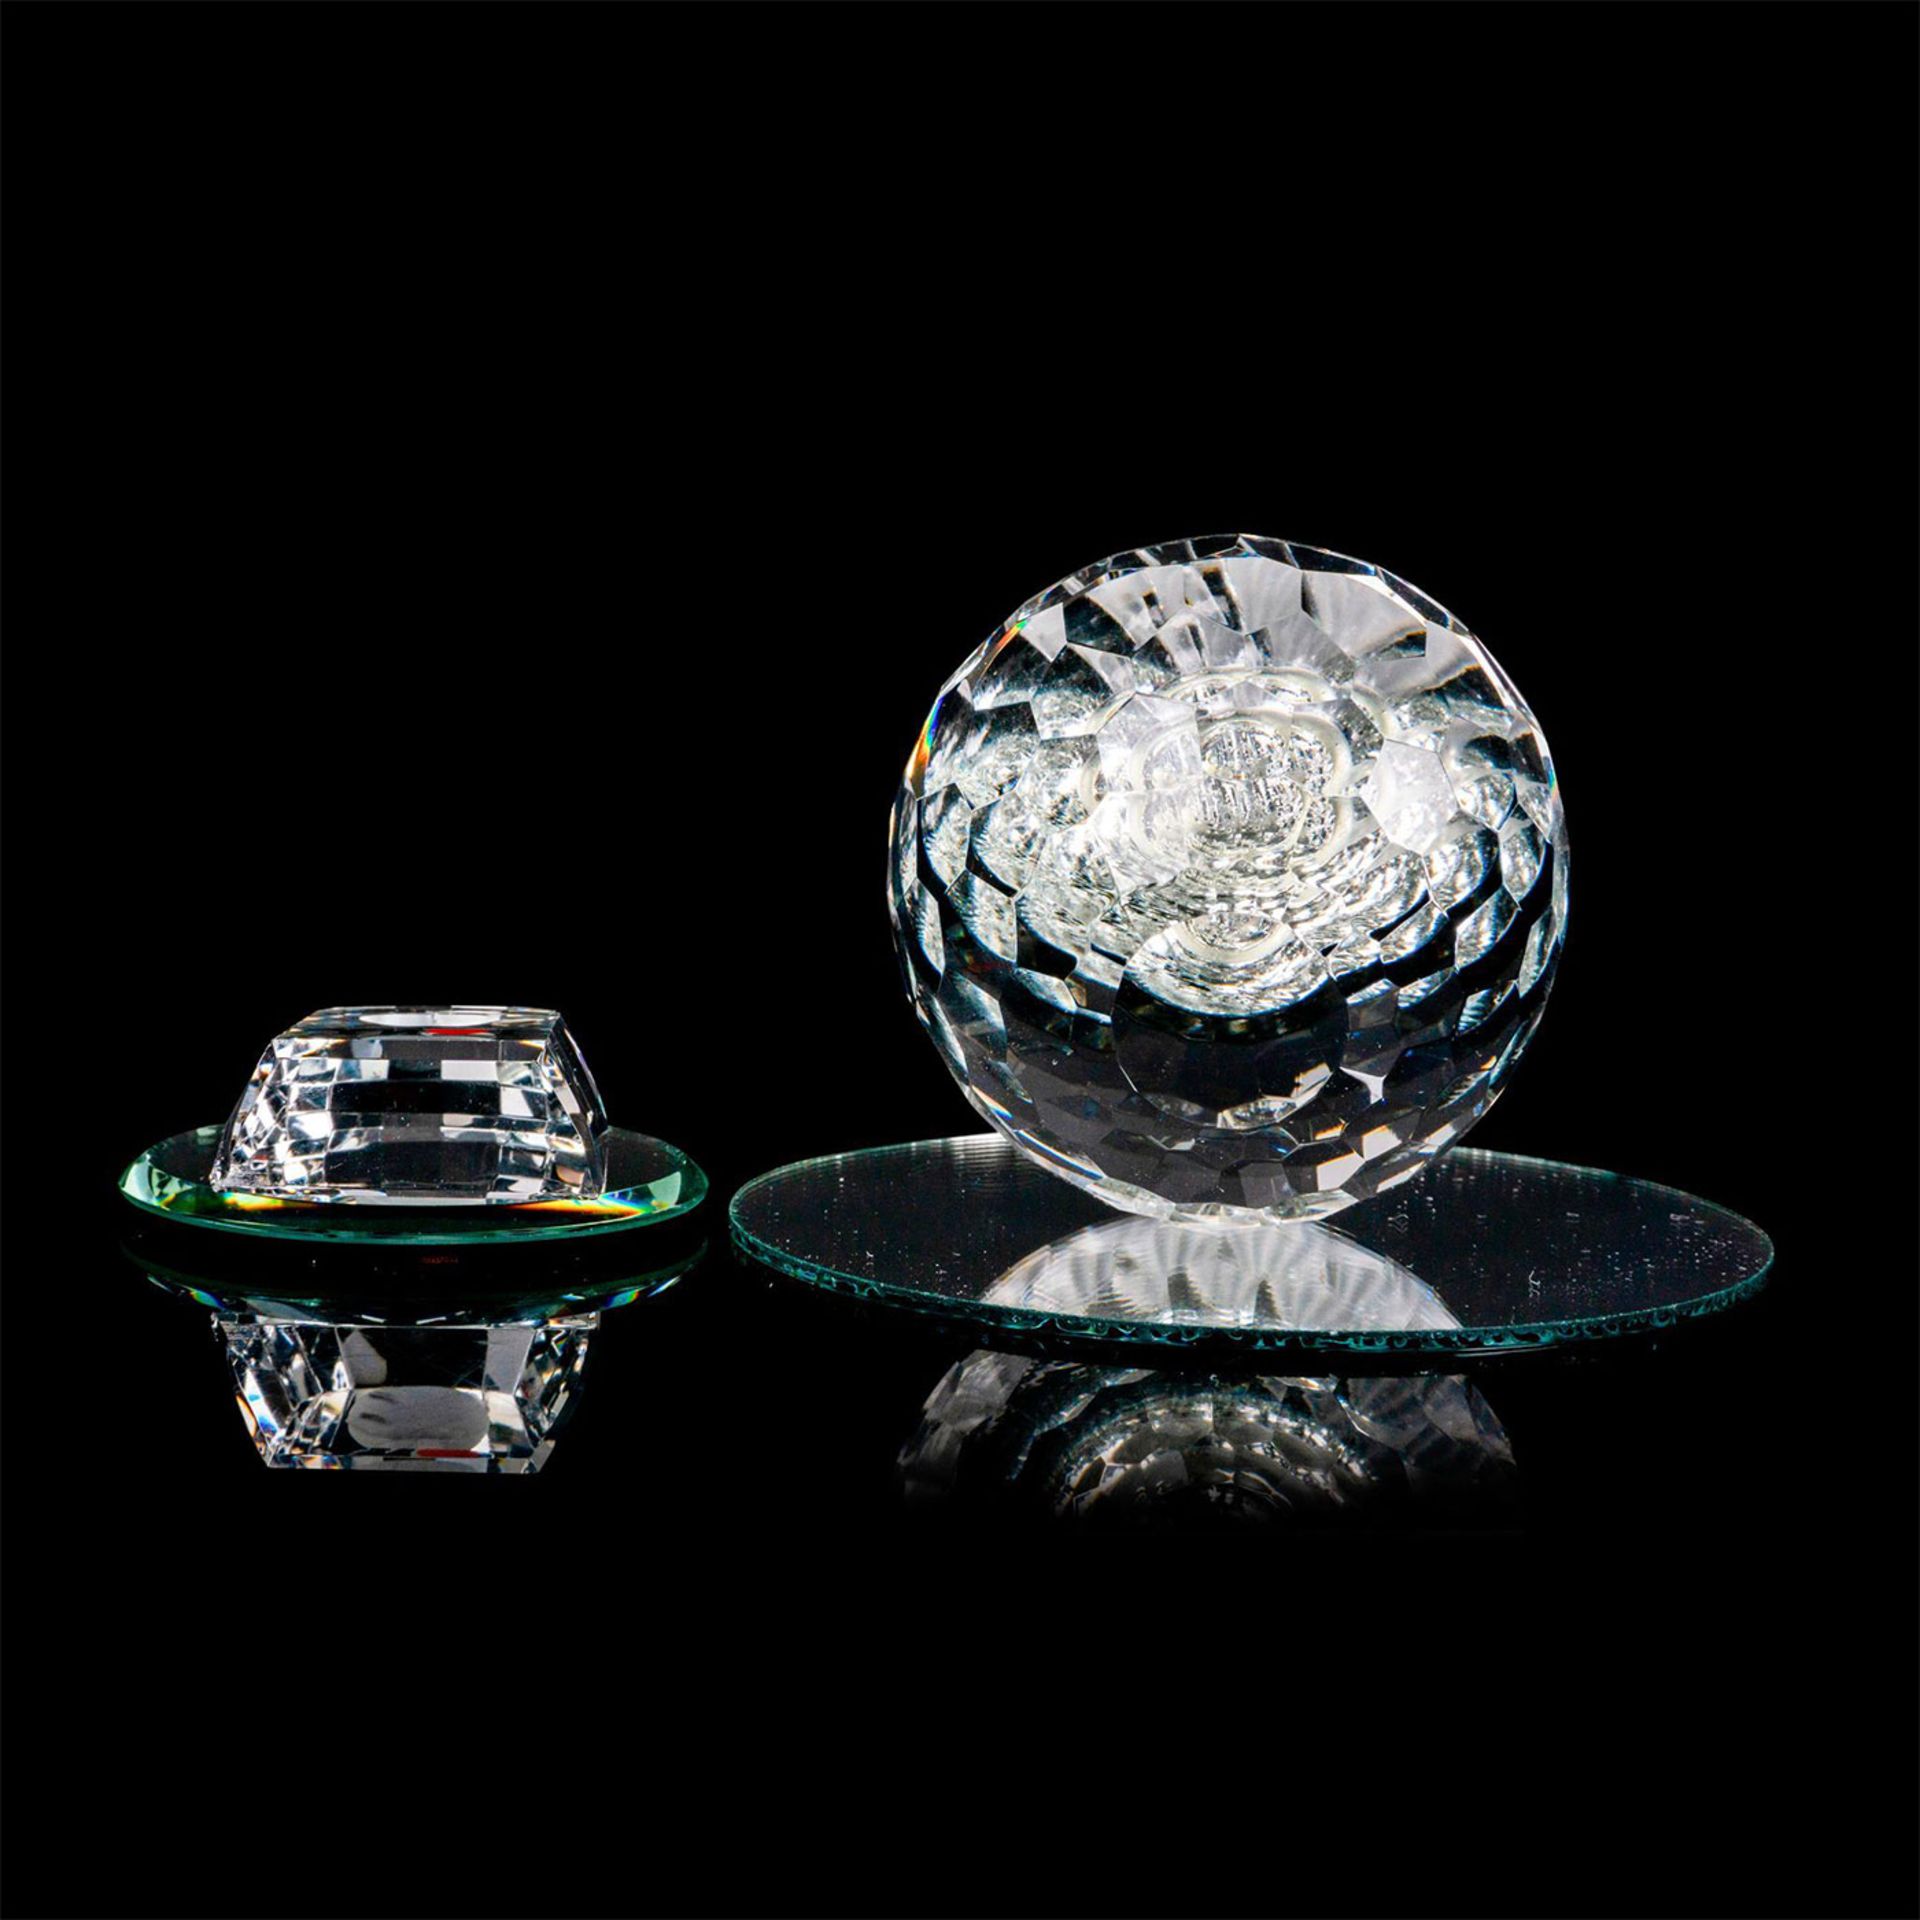 2pc Crystal Figurines + Base, New York - Image 3 of 3